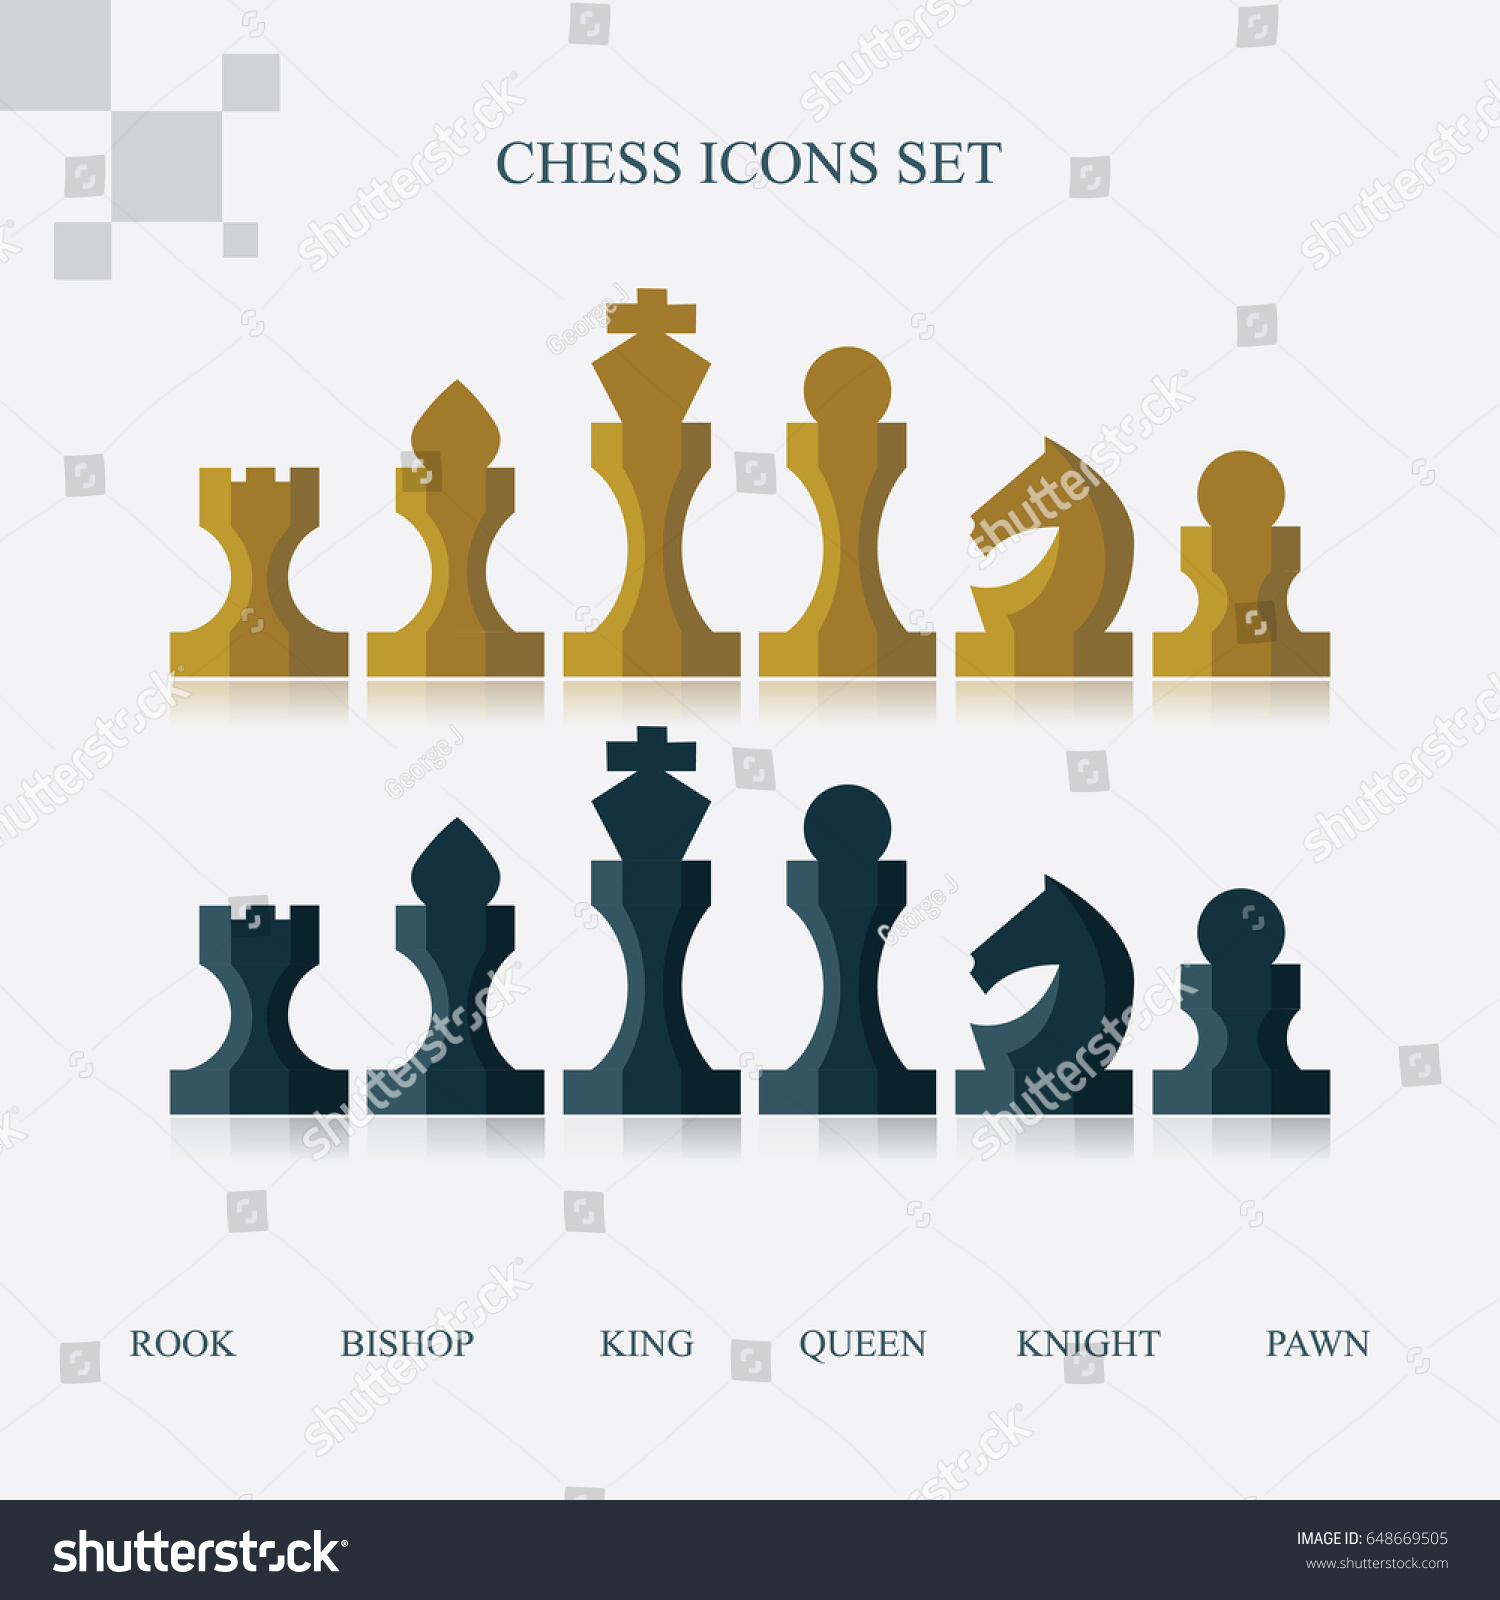 Modern Flat Vector Chess Icons Set Stock Vector Royalty Free